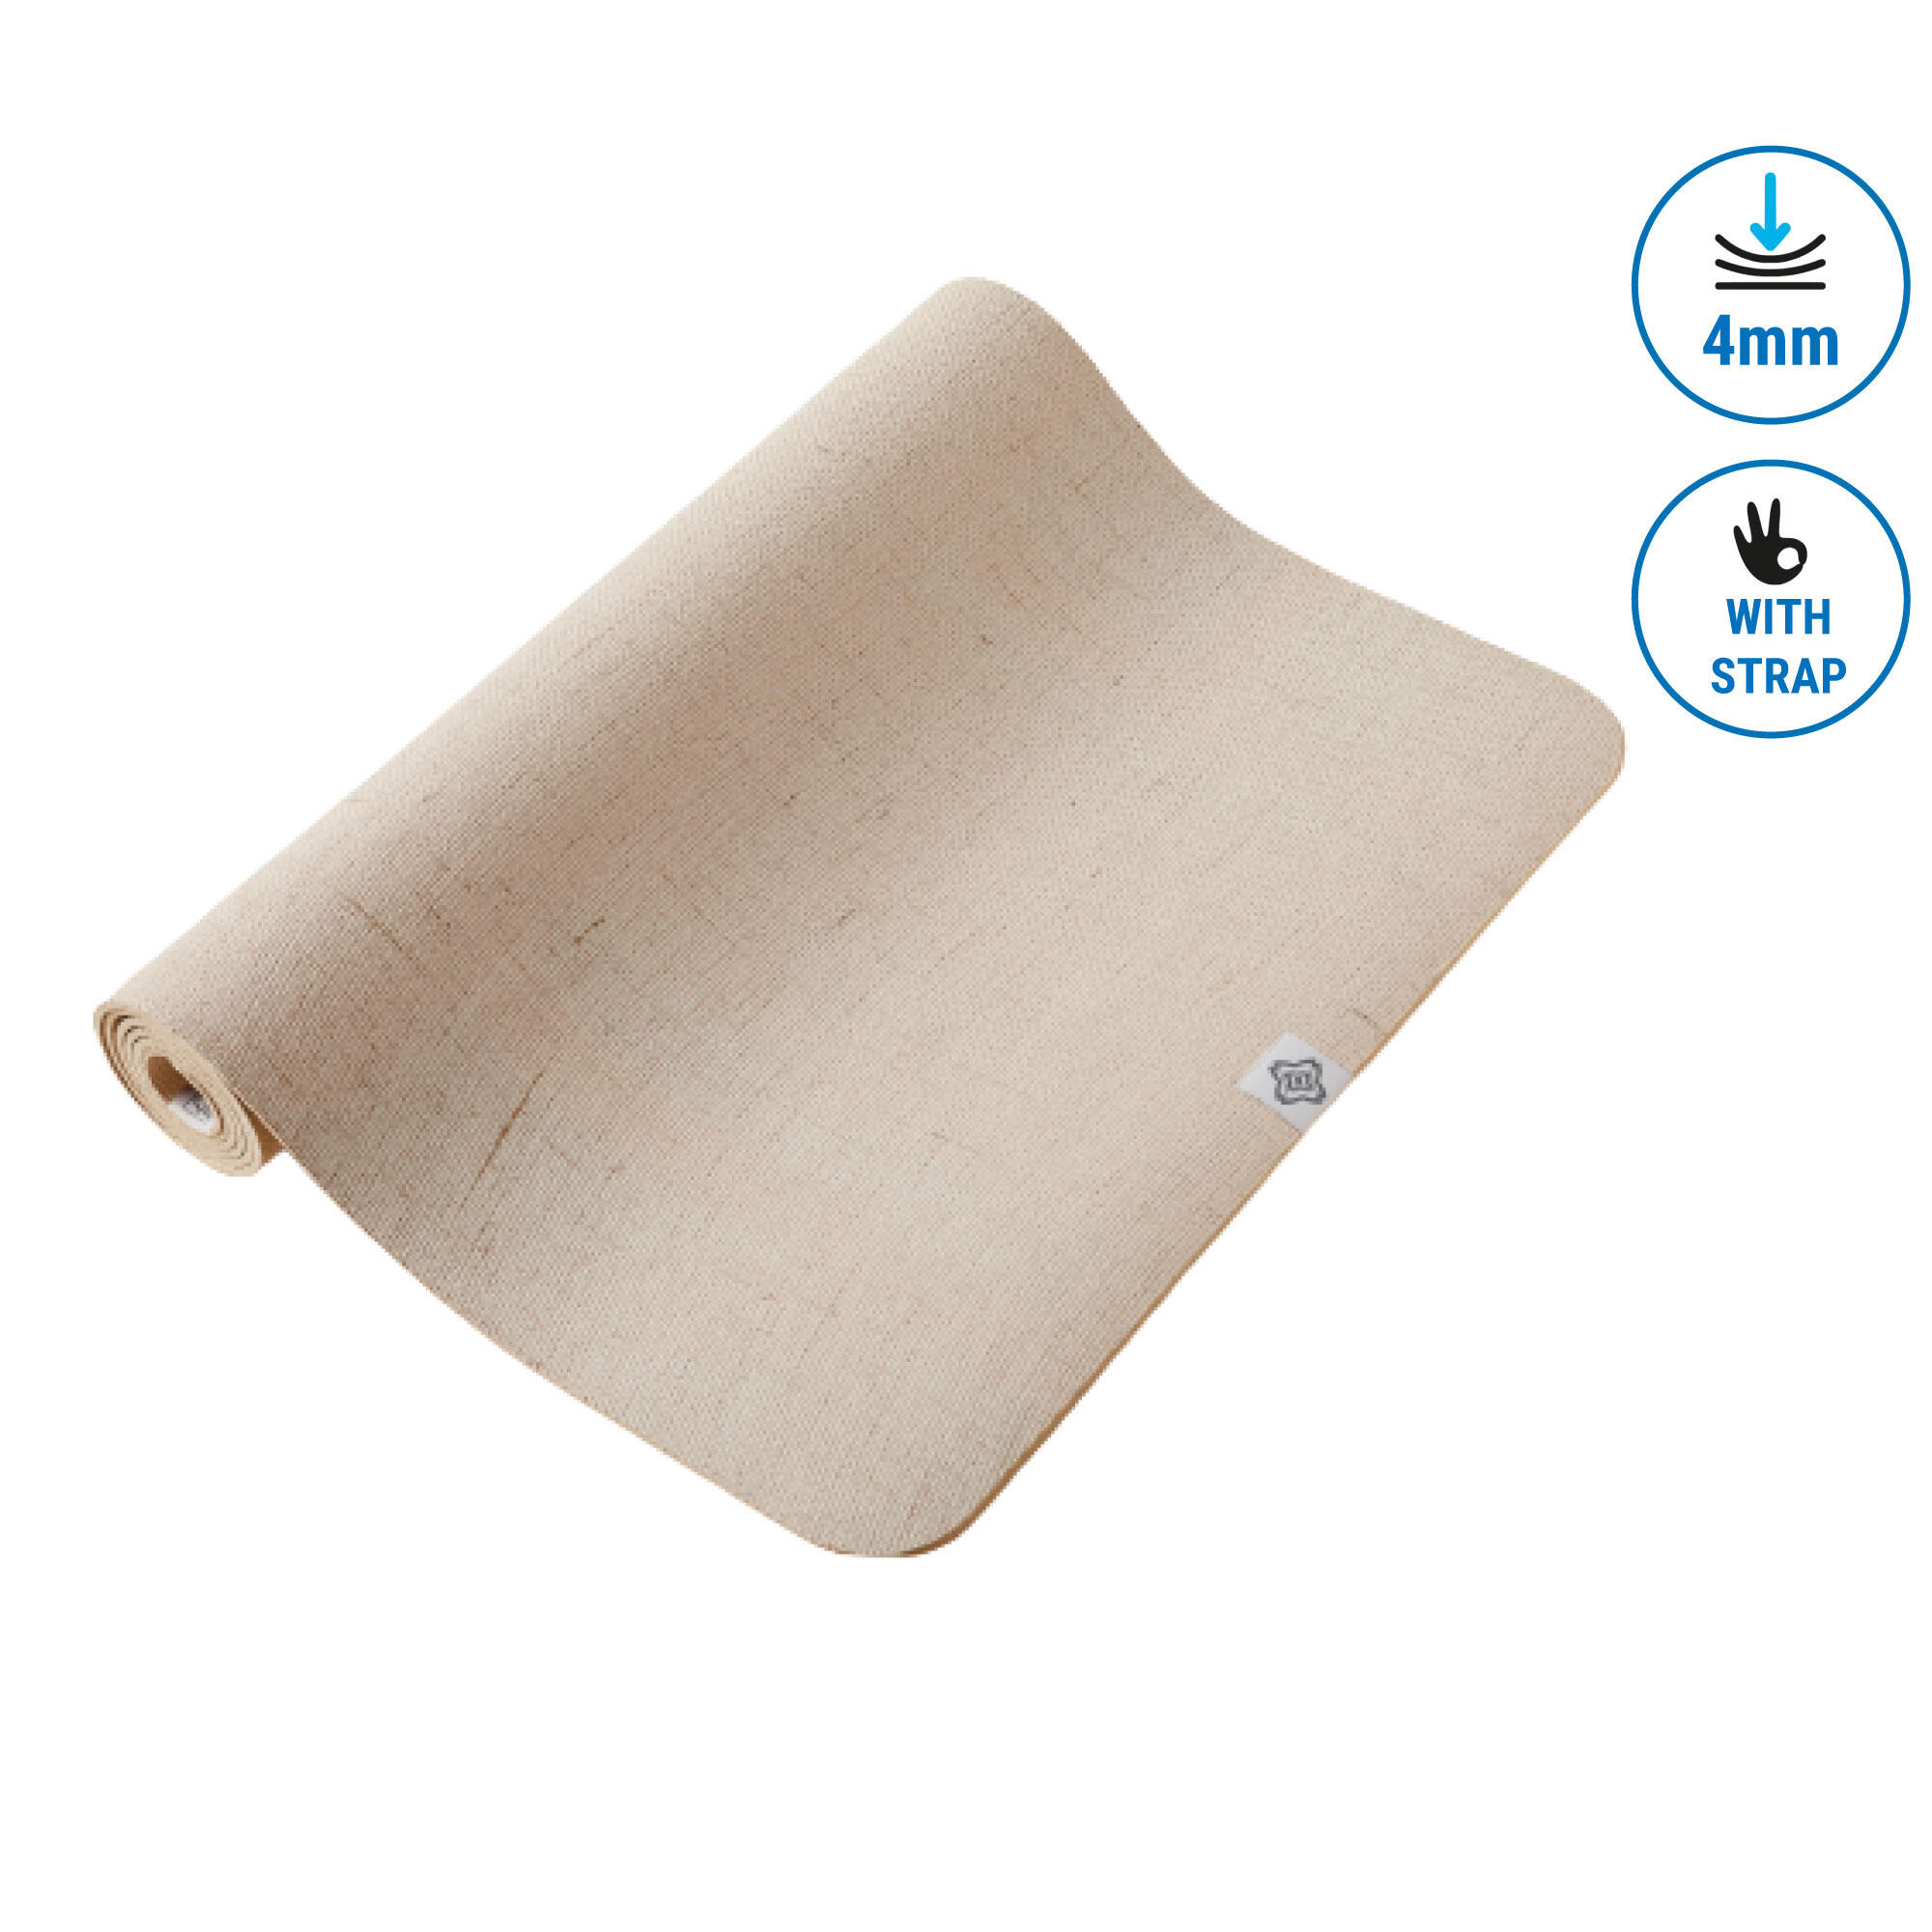 Yoga Mat, 4 mm thick, 183 x 61cm, with Strap, Jute and Natural Rubber,  Dynamic